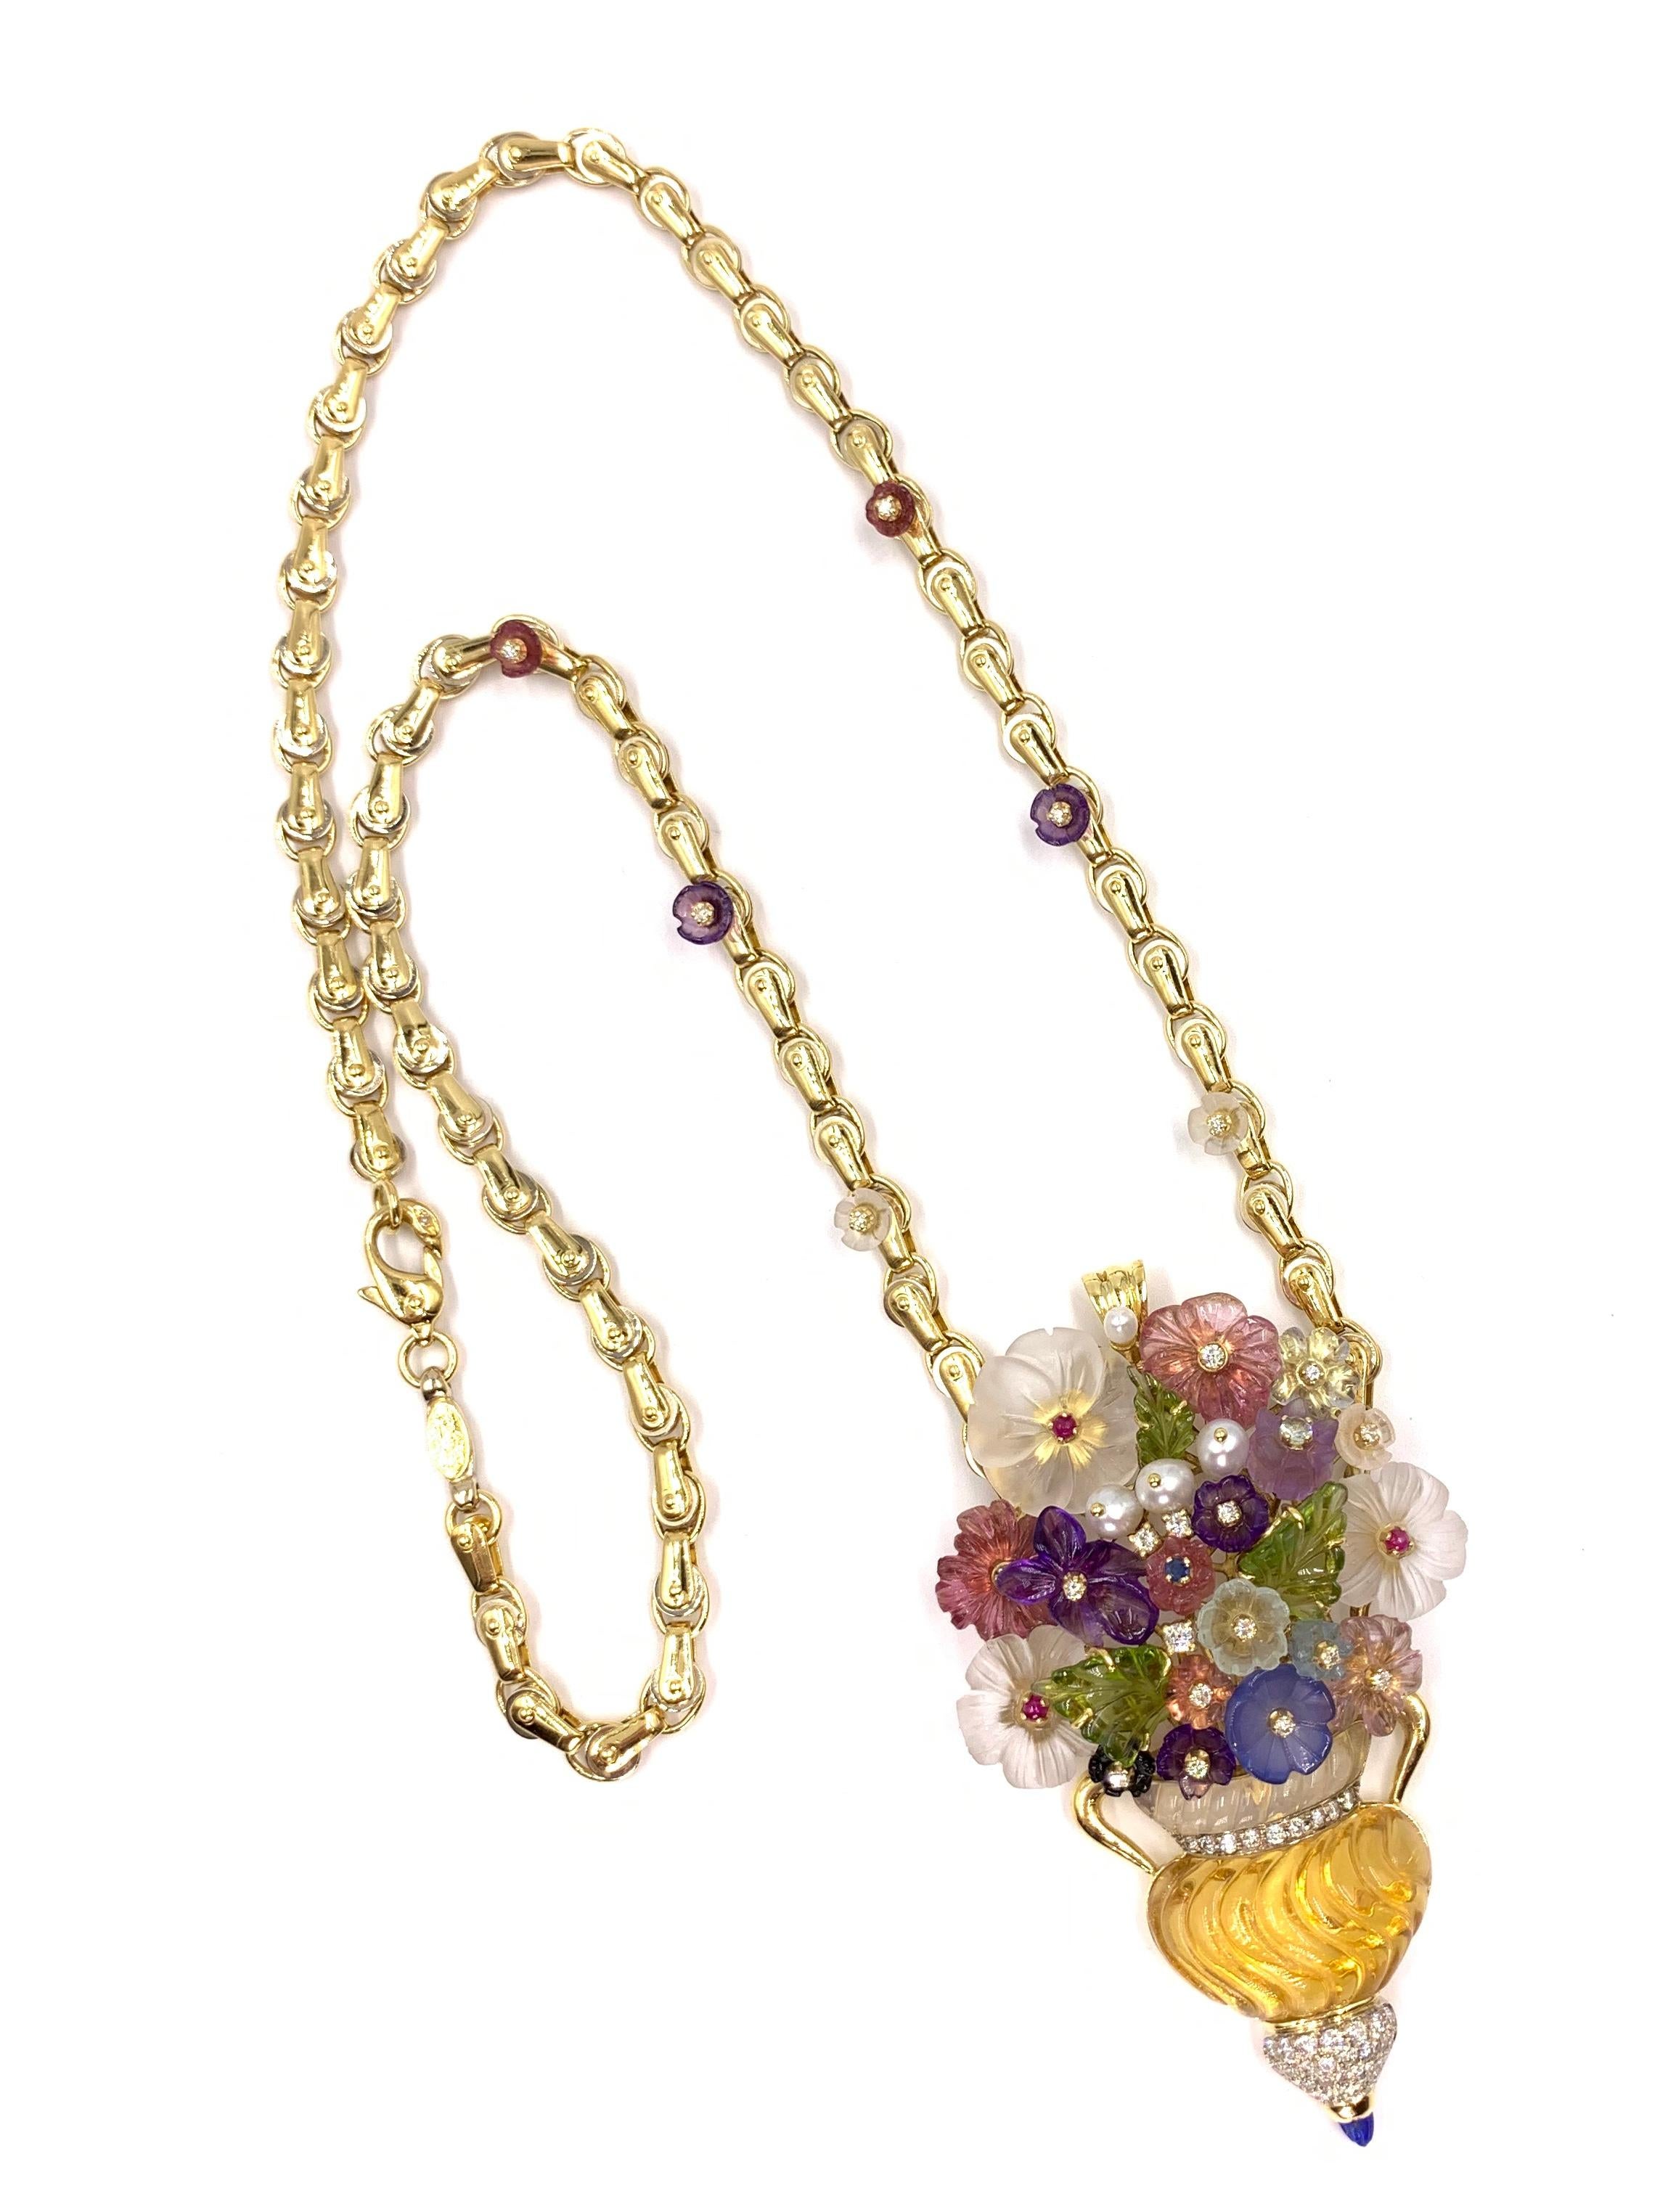 Large Floral Santagostino Gemstone and Diamond 18 Karat Pendant Necklace In Good Condition For Sale In Pikesville, MD